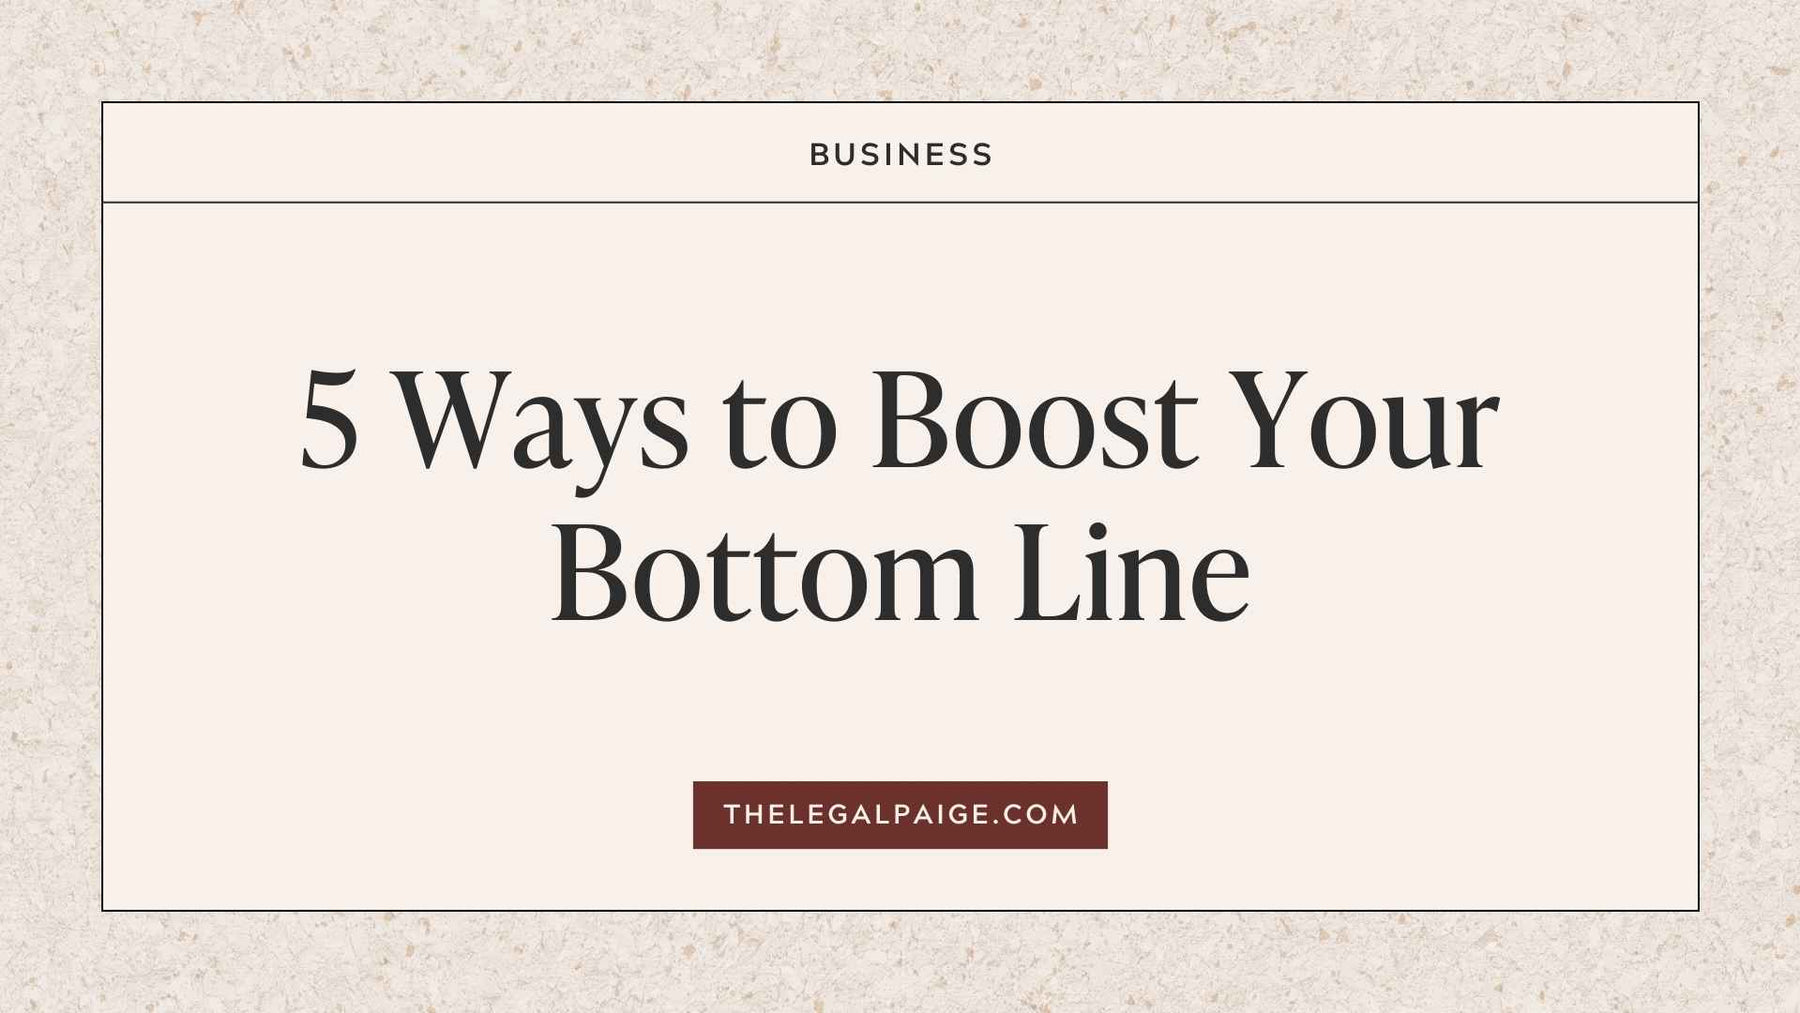 5 Ways to Boost Your Bottom Line